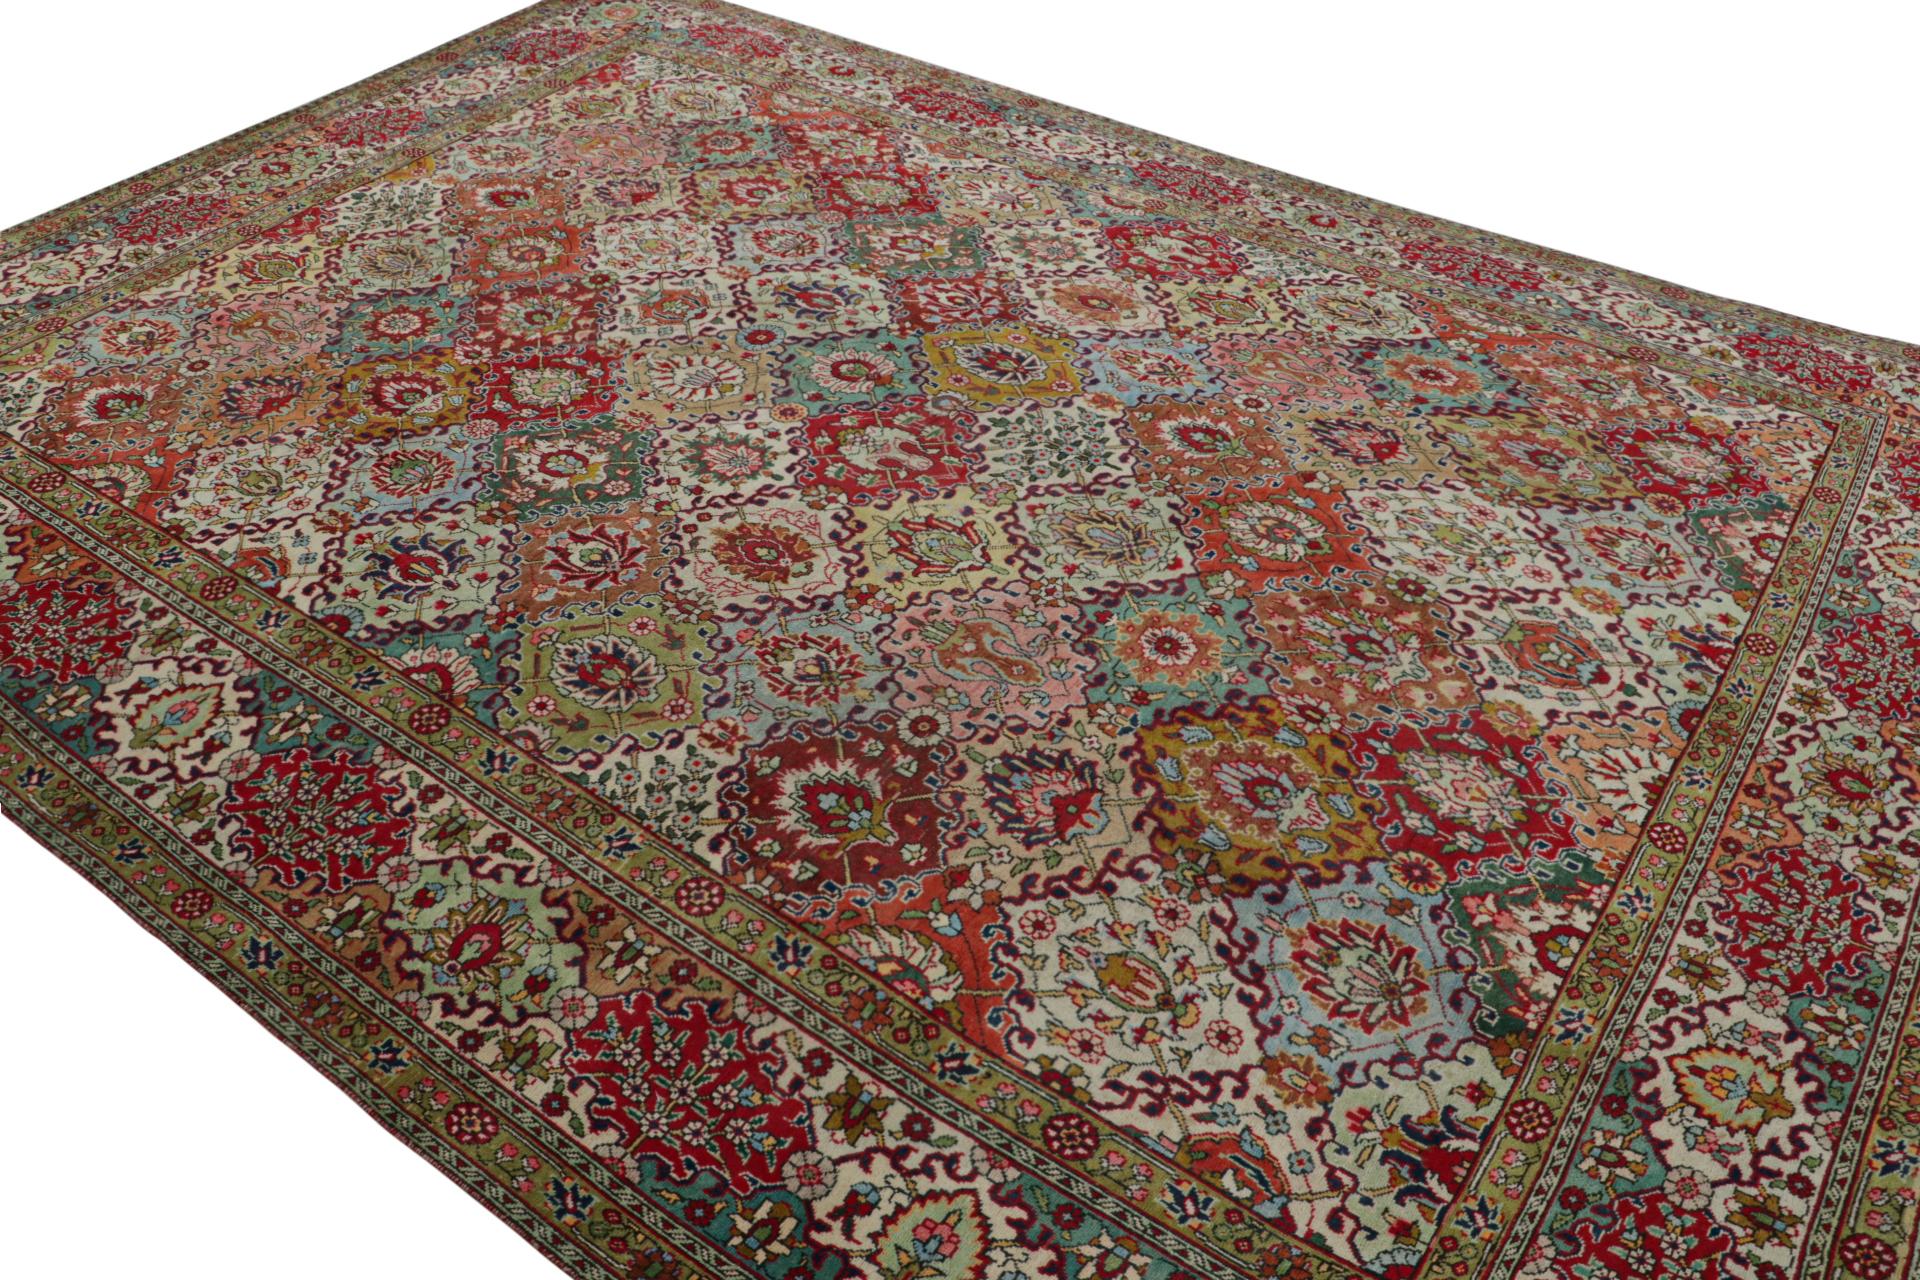 Hand knotted in wool, a 10x12 Persian Tabriz rug circa 1970-1980 - latest to join Rug & Kilim’s vintage selections.

On the Design:

Drawing on Kerman and Yazd rug designs, this rug is a royal selection that enjoys a vivid polychromatic floral